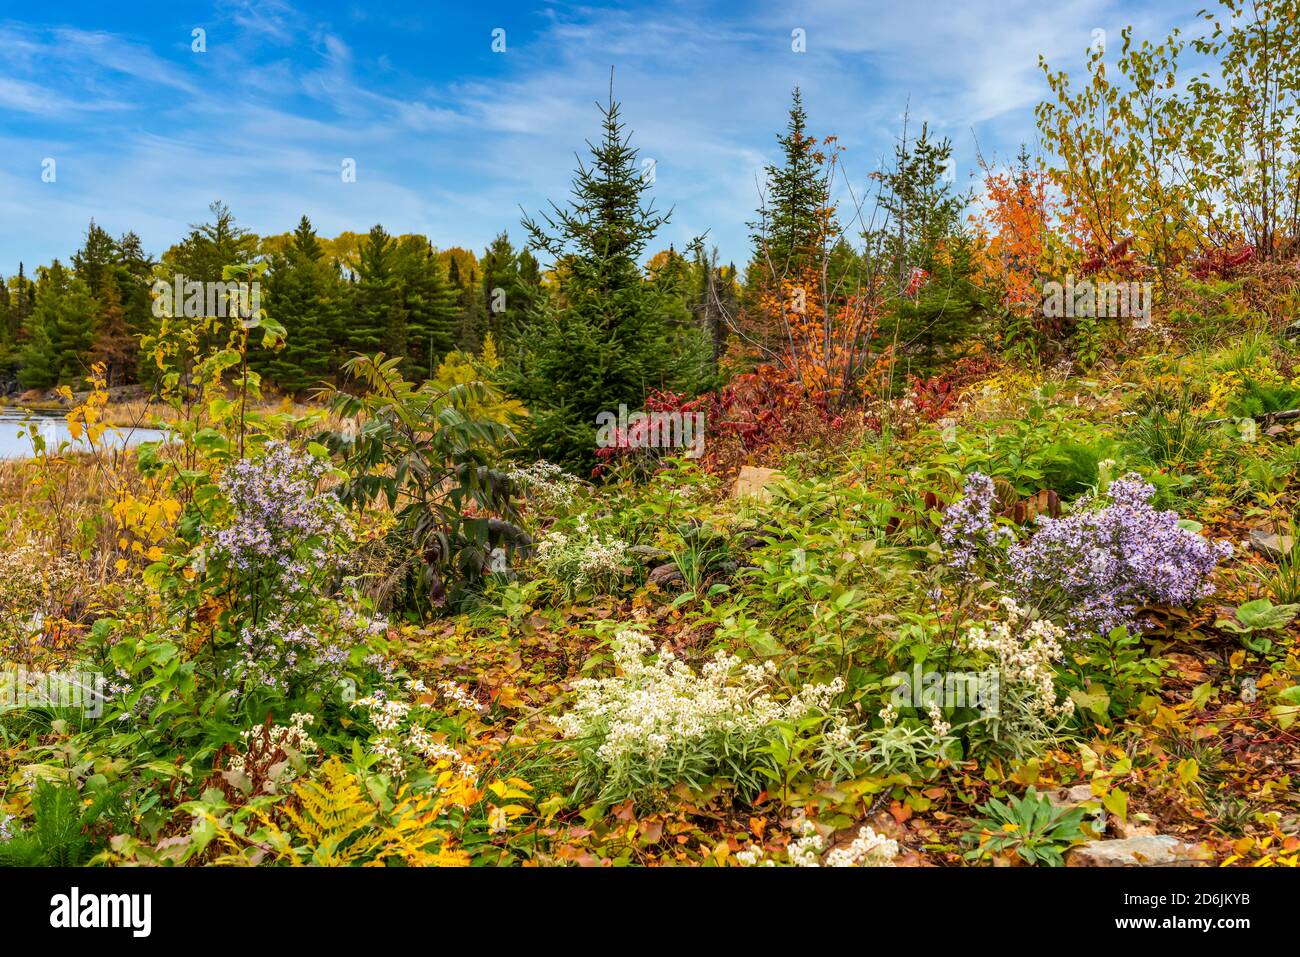 Autumn wildflowers with fall foliage color near Fort Frances, Ontario, Canada. Stock Photo